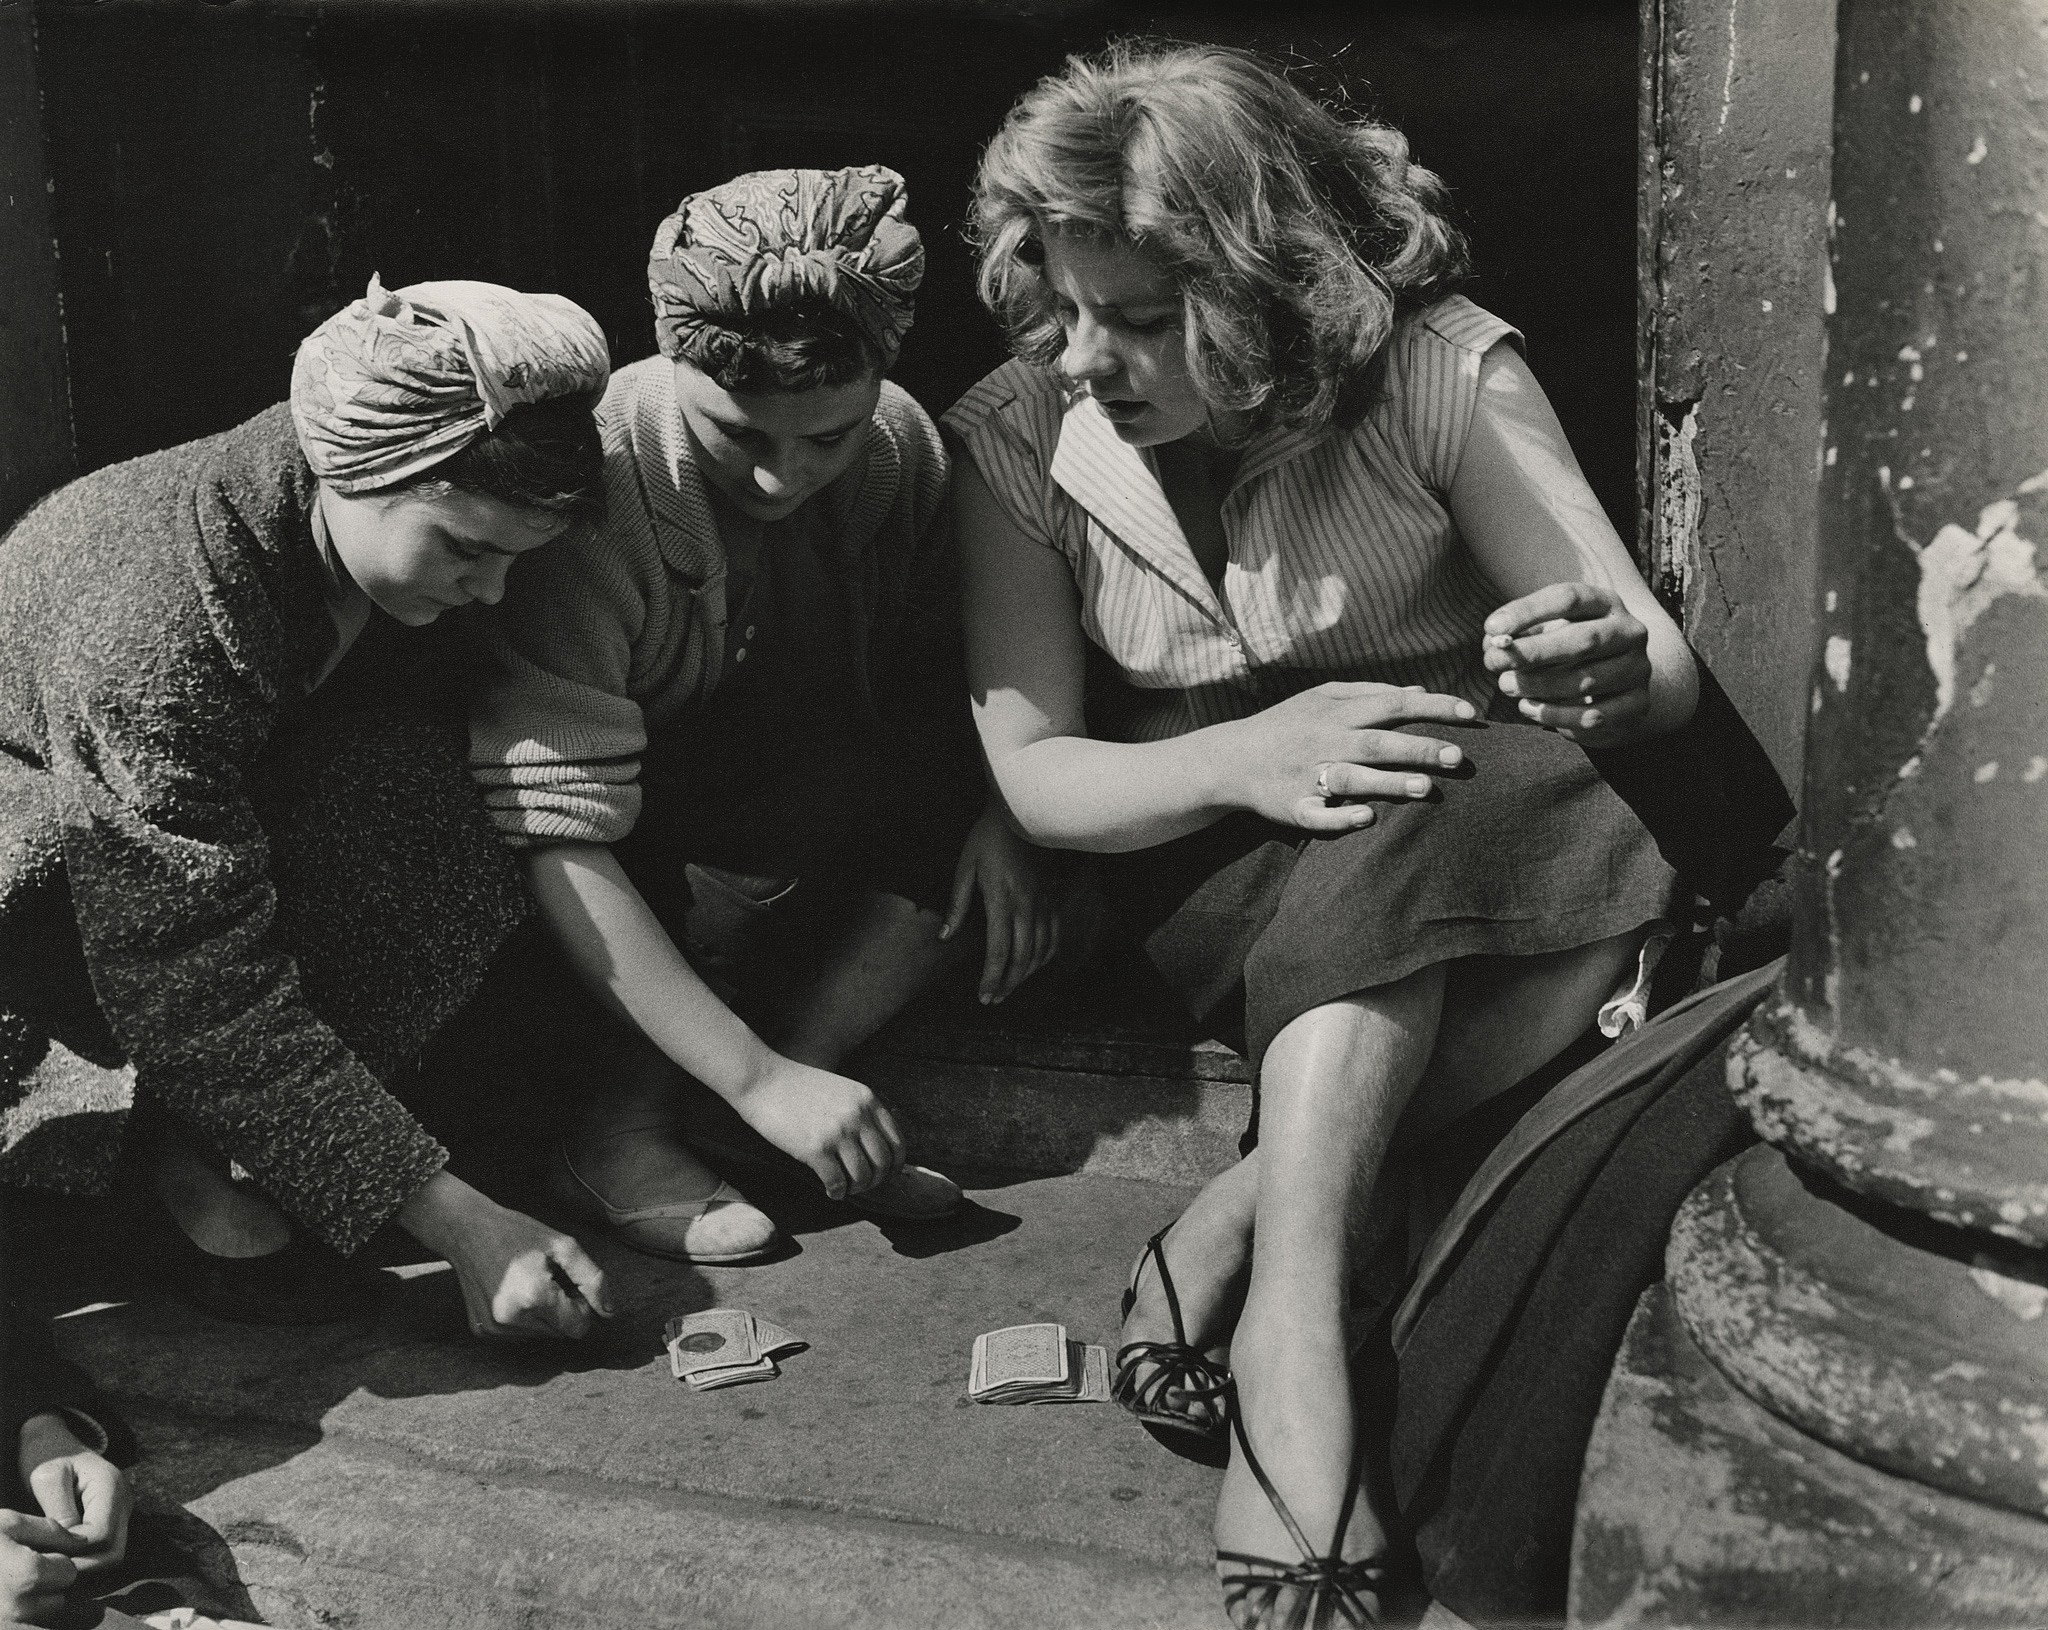 PRESS RELEASE: Roger Mayne: What he saved for his family, Jan 17 - Mar 25, 2023